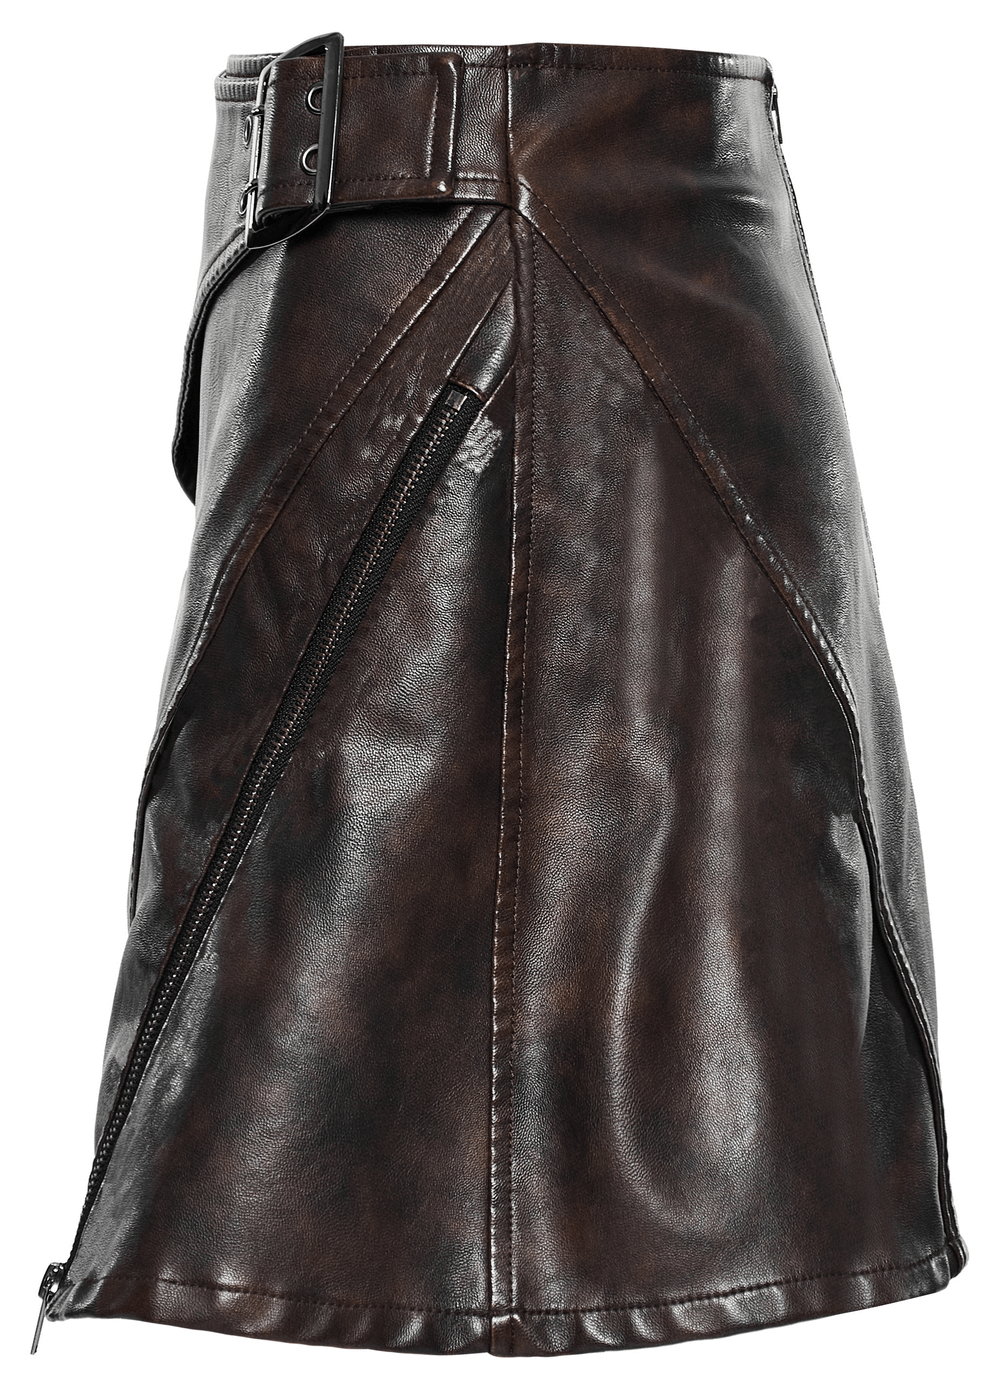 Women's Faux Leather Mini Skirt with Side Buckle and Zippers